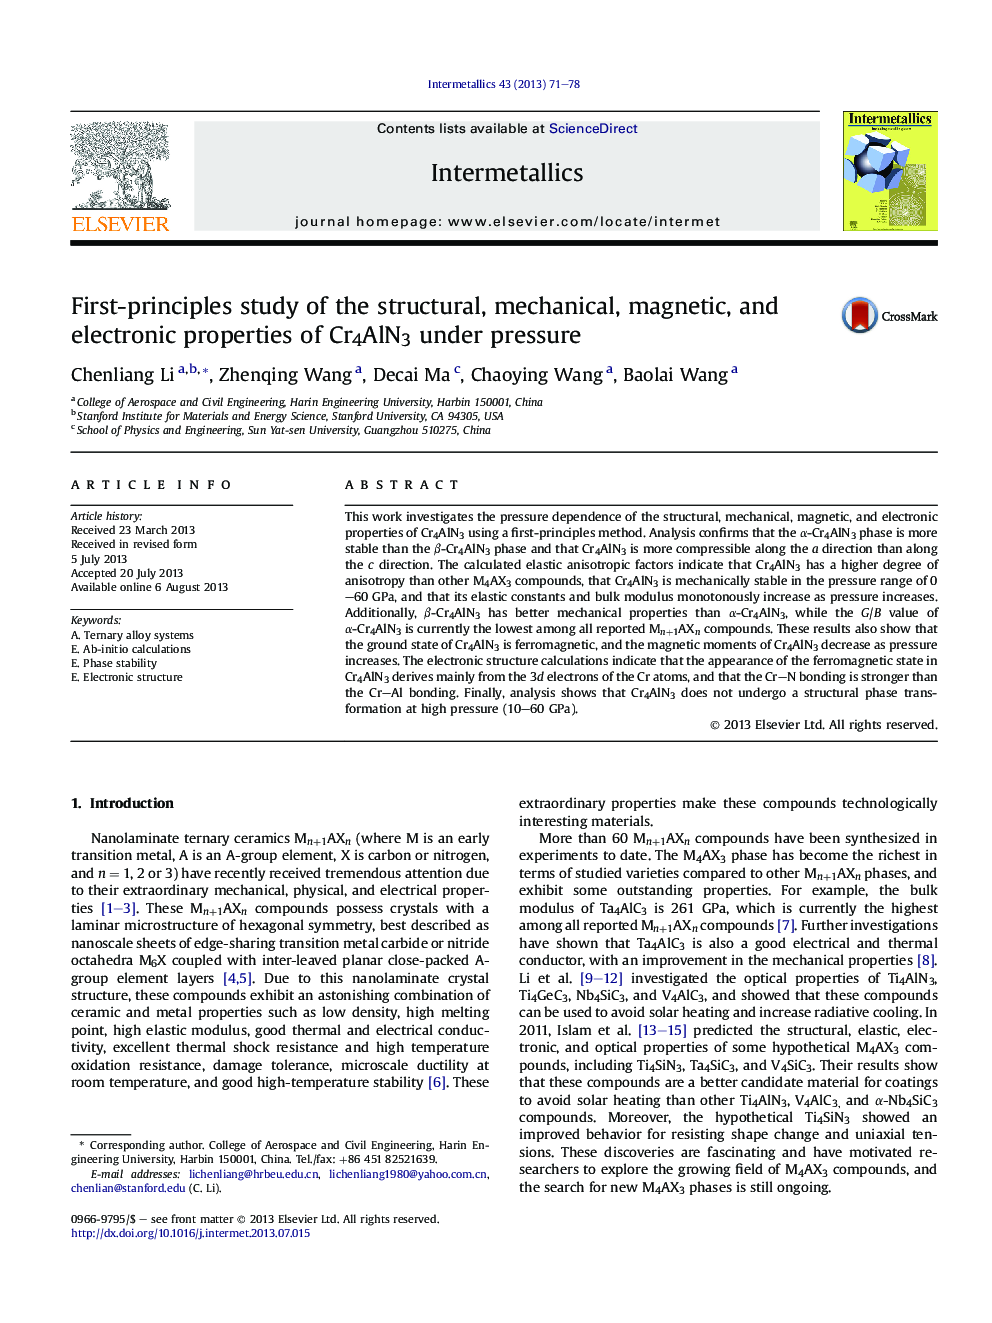 First-principles study of the structural, mechanical, magnetic, and electronic properties of Cr4AlN3 under pressure